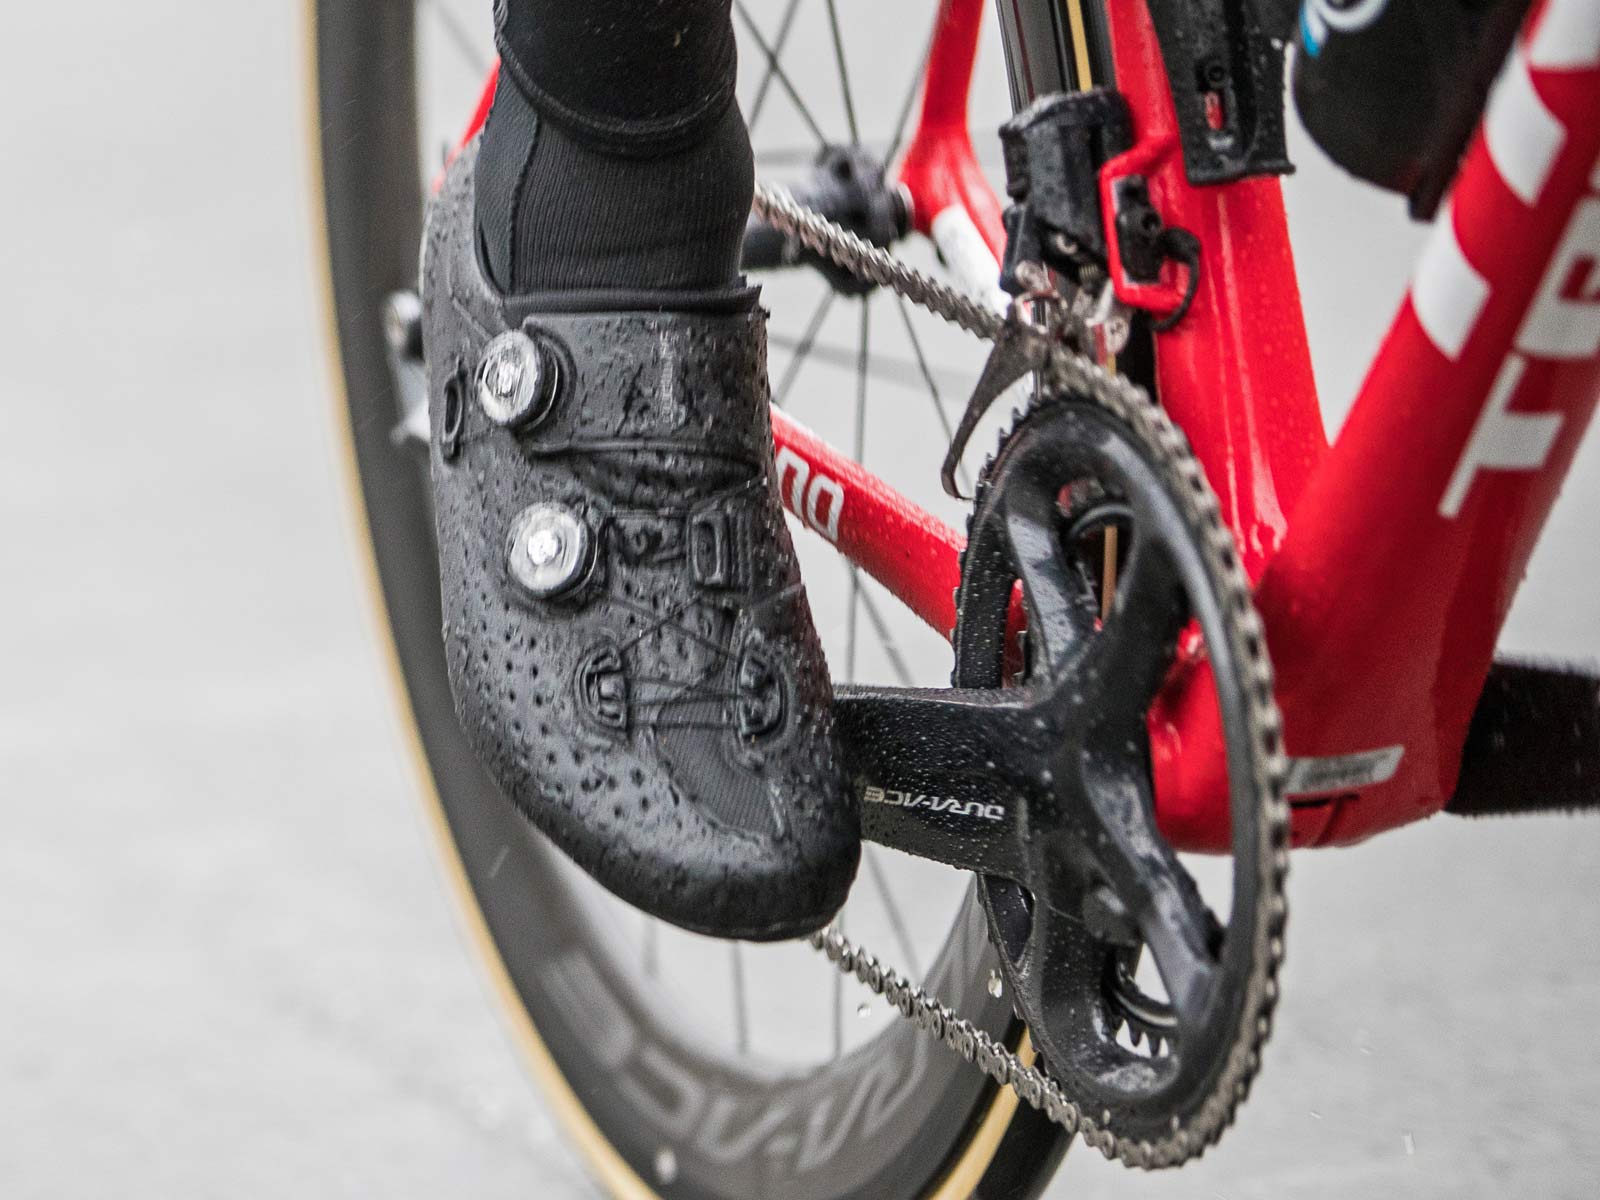 Review: Shimano S-Phyre RC9 road shoes’ stiff connection to the bike